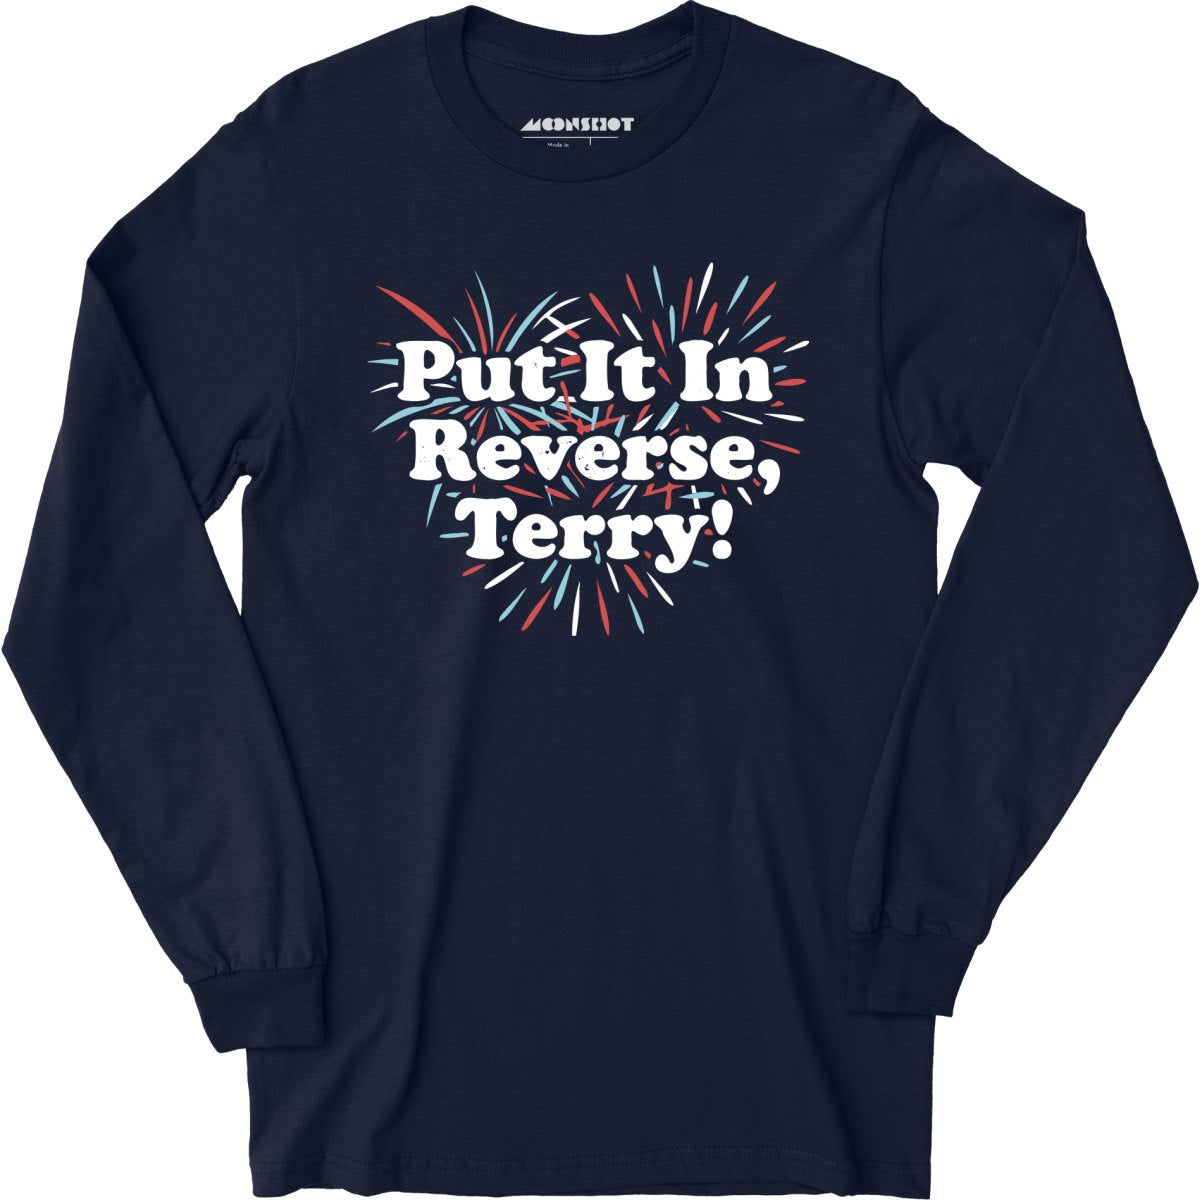 Put It In Reverse, Terry! - Long Sleeve T-Shirt